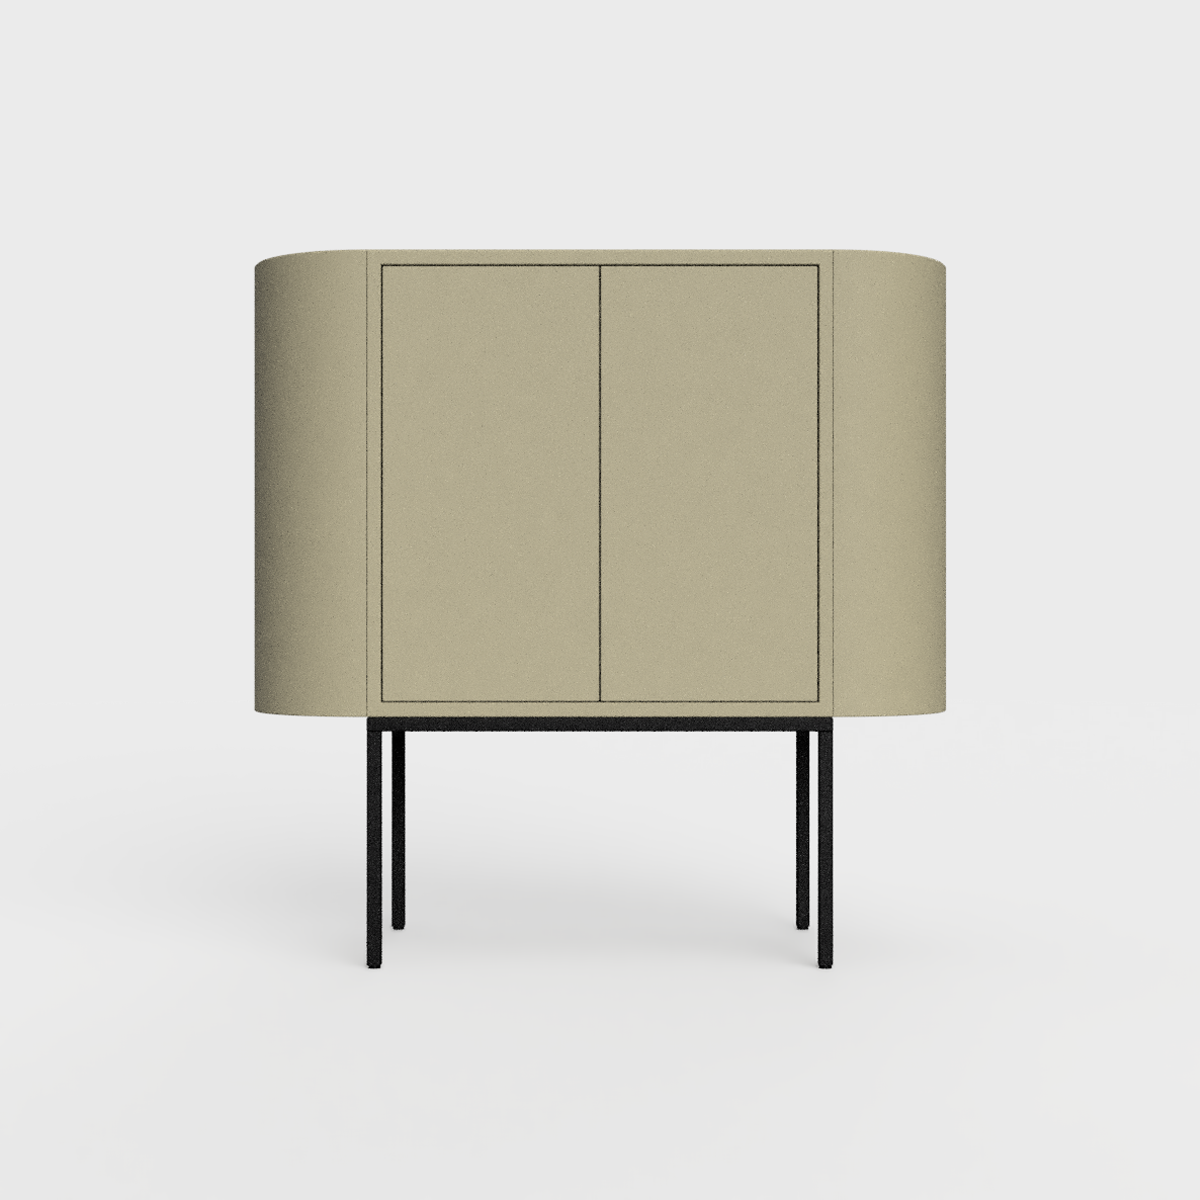 Siena 01 Sideboard in light olive color, powder-coated steel, elegant and modern piece of furniture for your living room